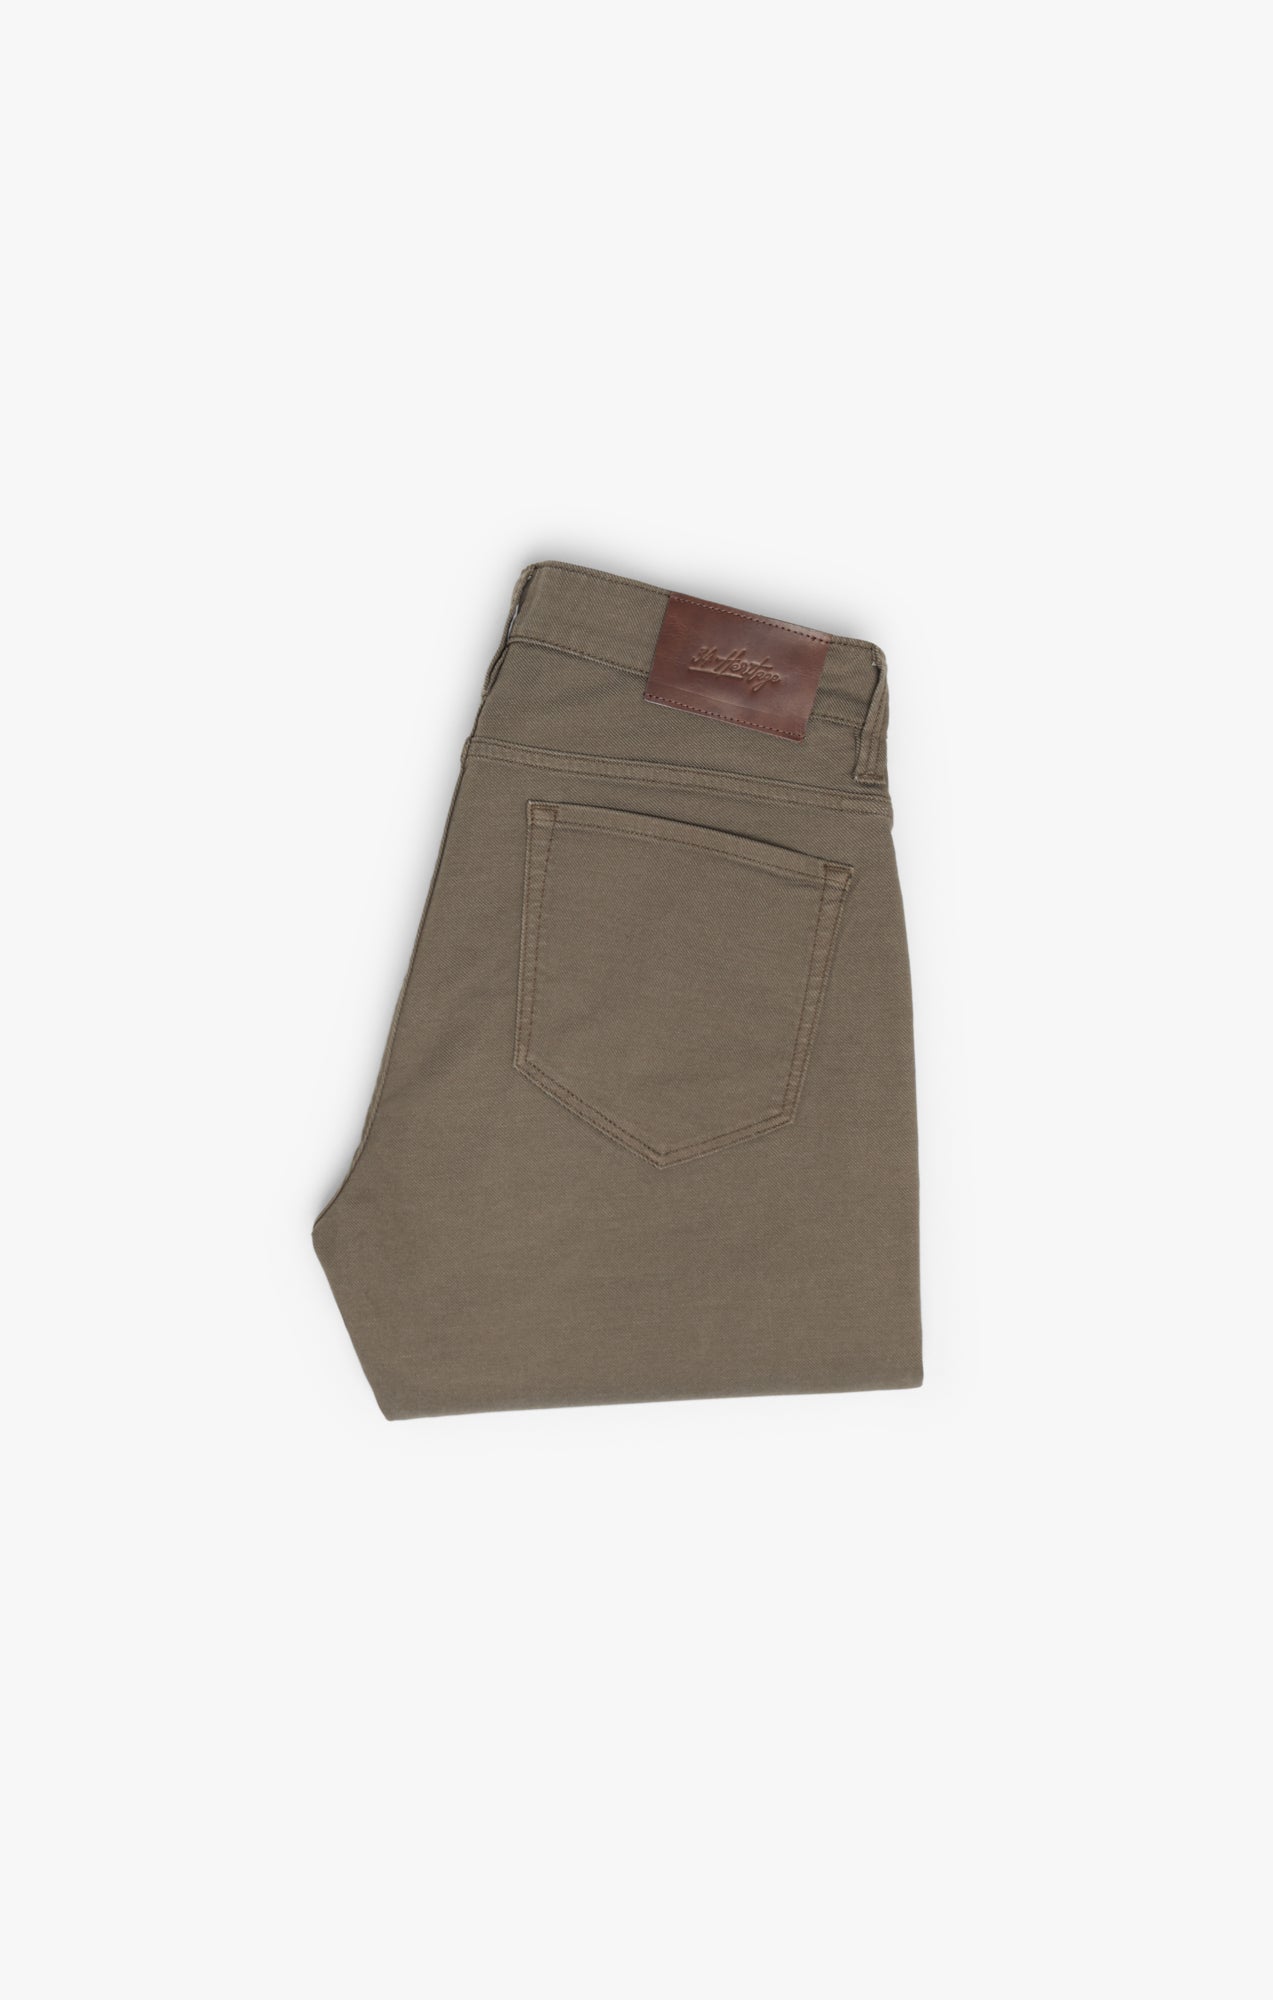 Courage Straight Leg Pants in Canteen Coolmax Image 9